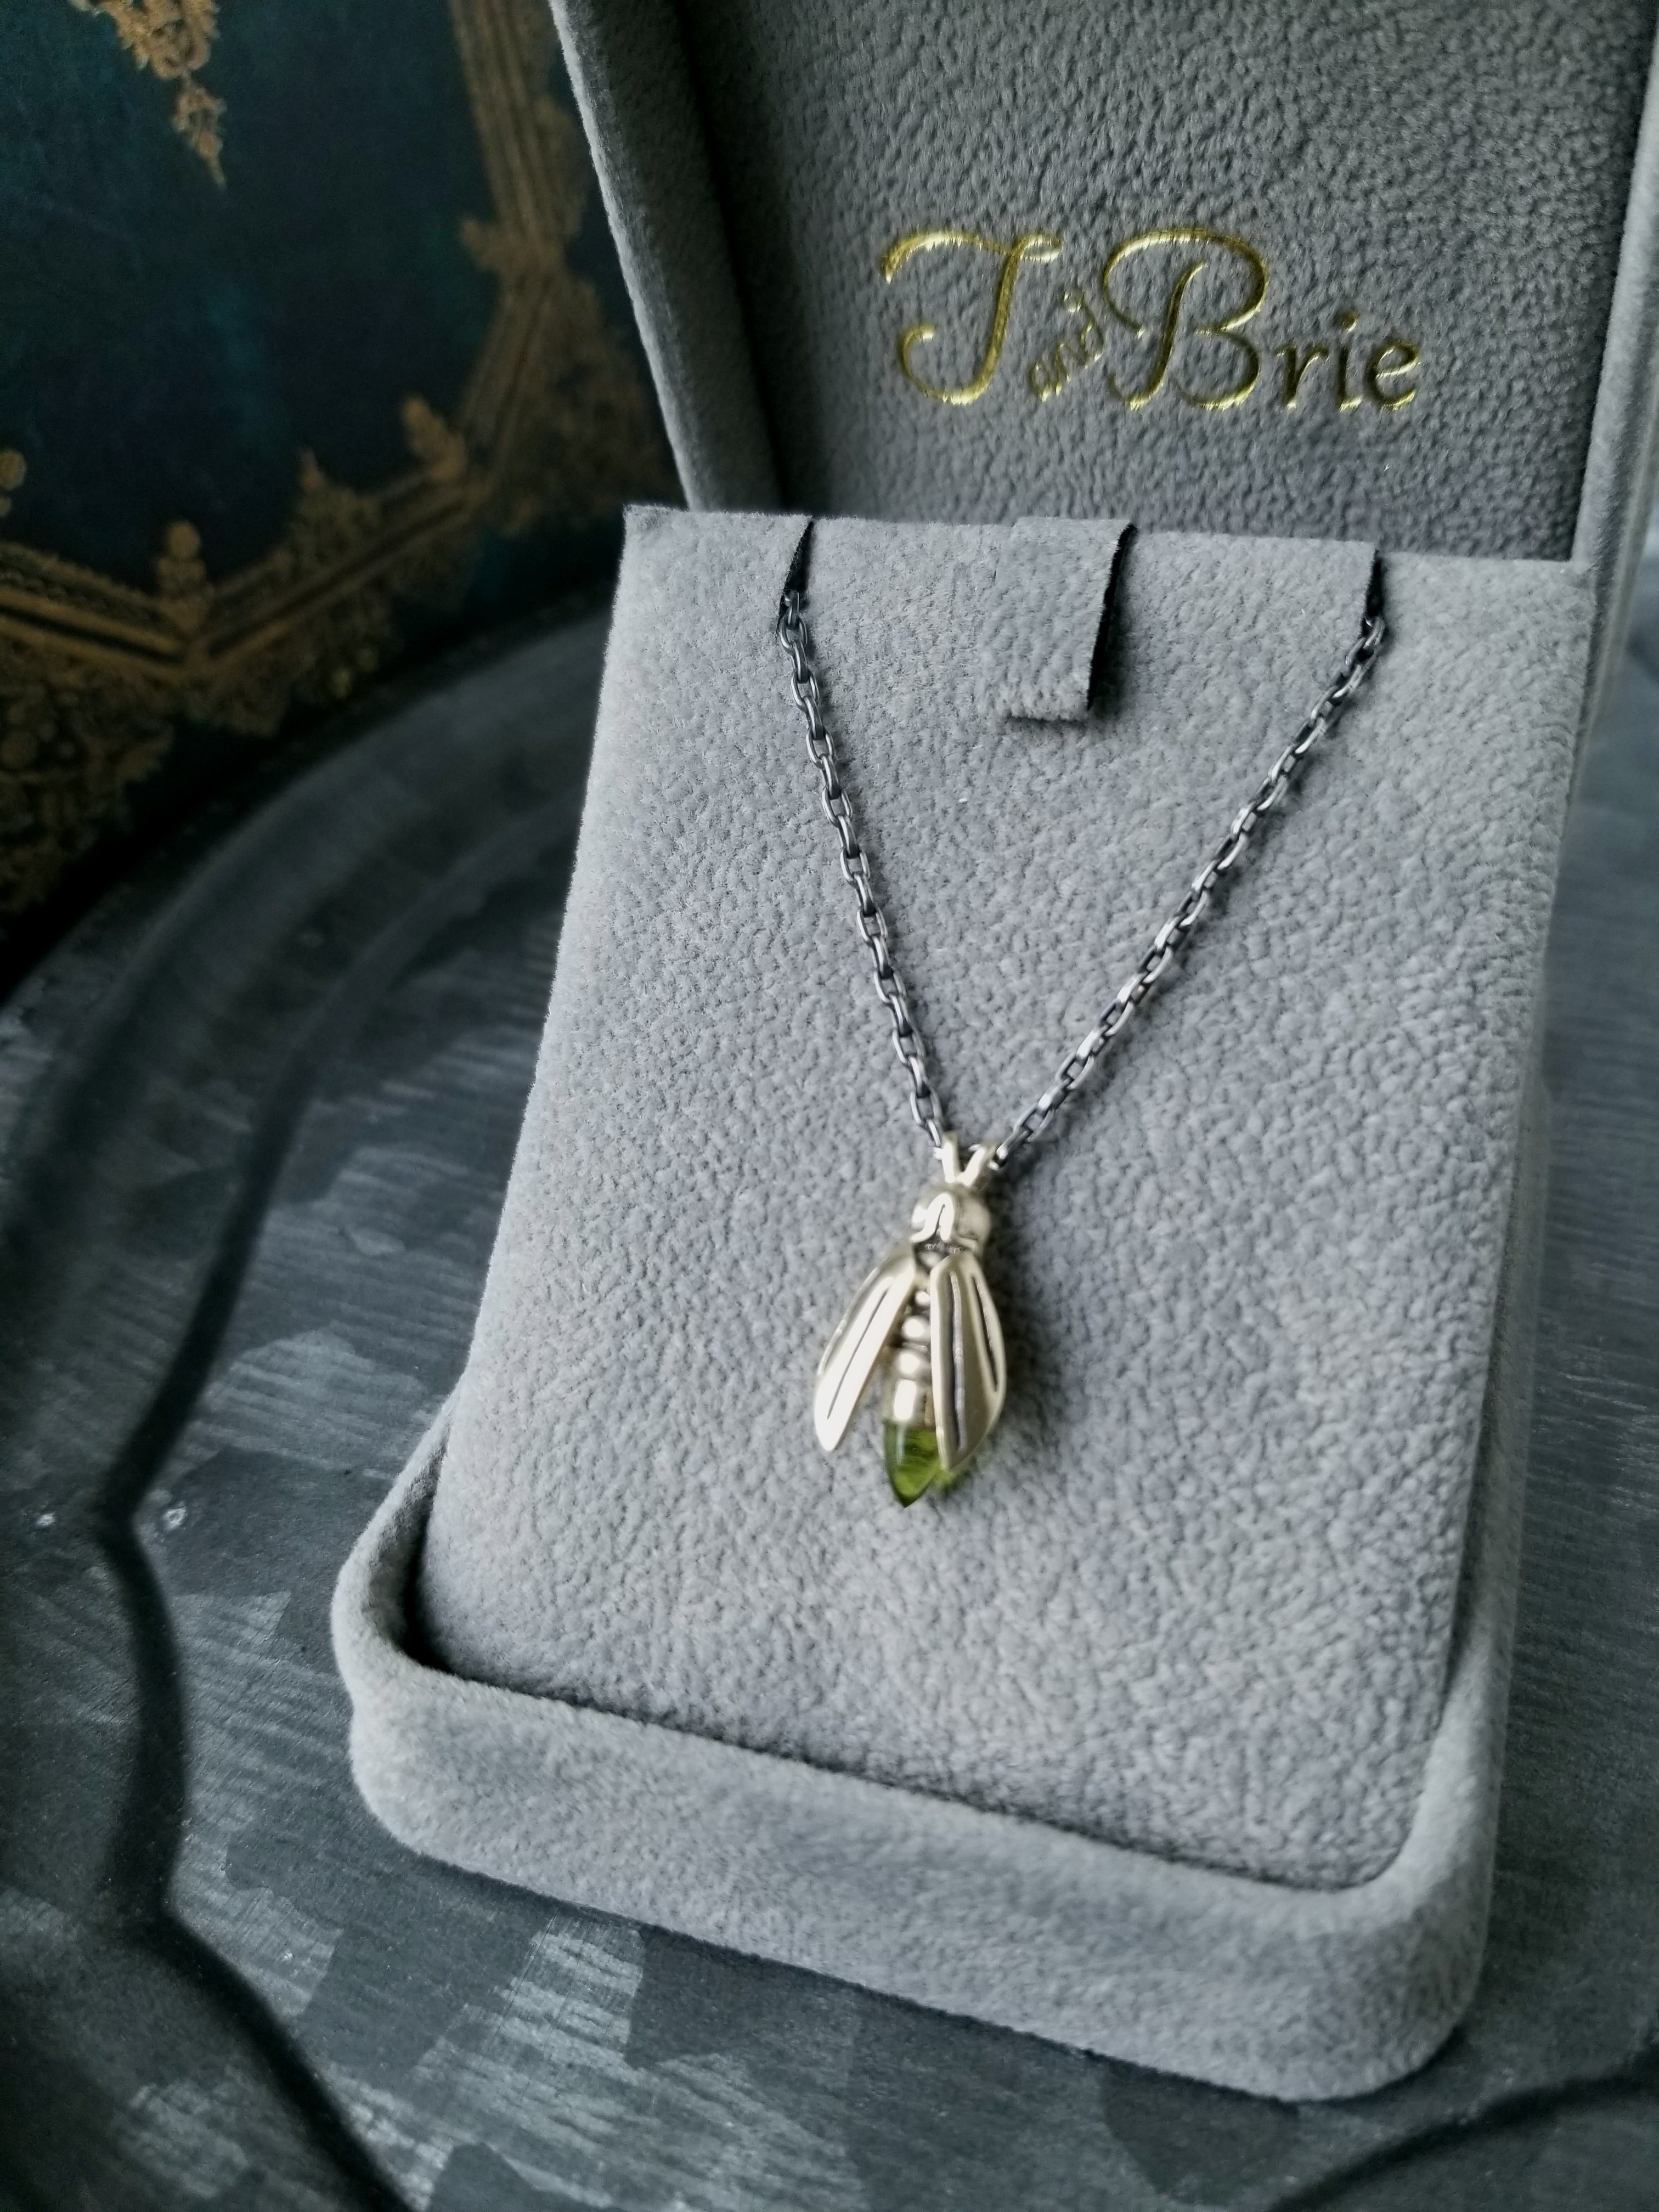 Peridot Firefly Necklace, Silver Firefly With Peridot Gem, Insect Amulet,  Lightening Bug Jewelry, Firefly Charm Necklace, Firefly Necklace - Etsy |  Silver jewelry diy, Silver necklaces, Handmade jewelry necklace